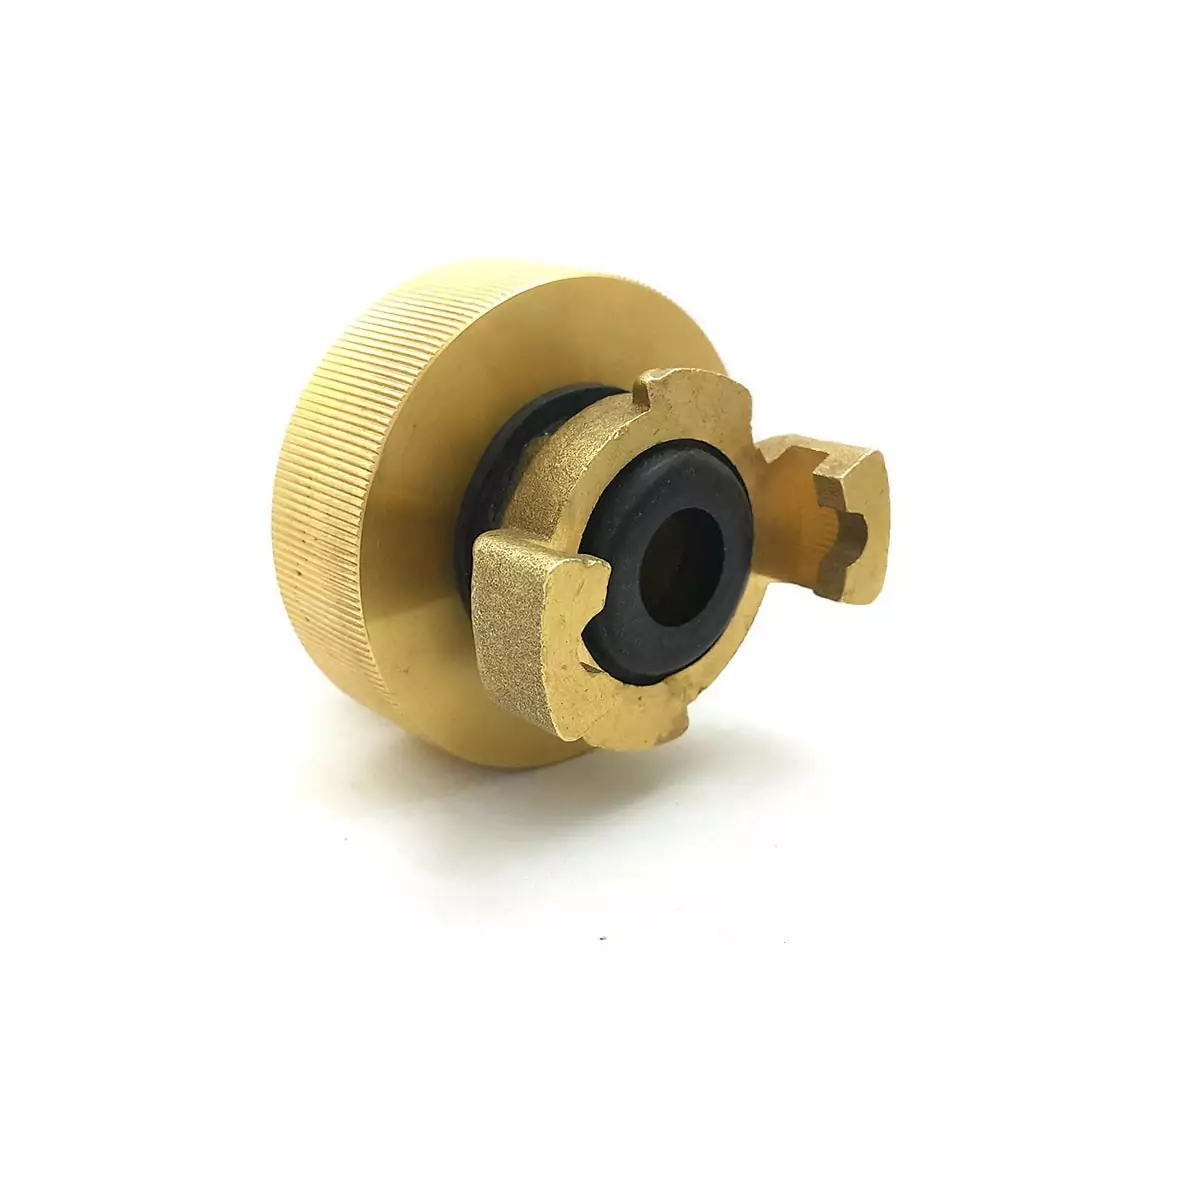 S60x6 female coupling - express fitting outlet